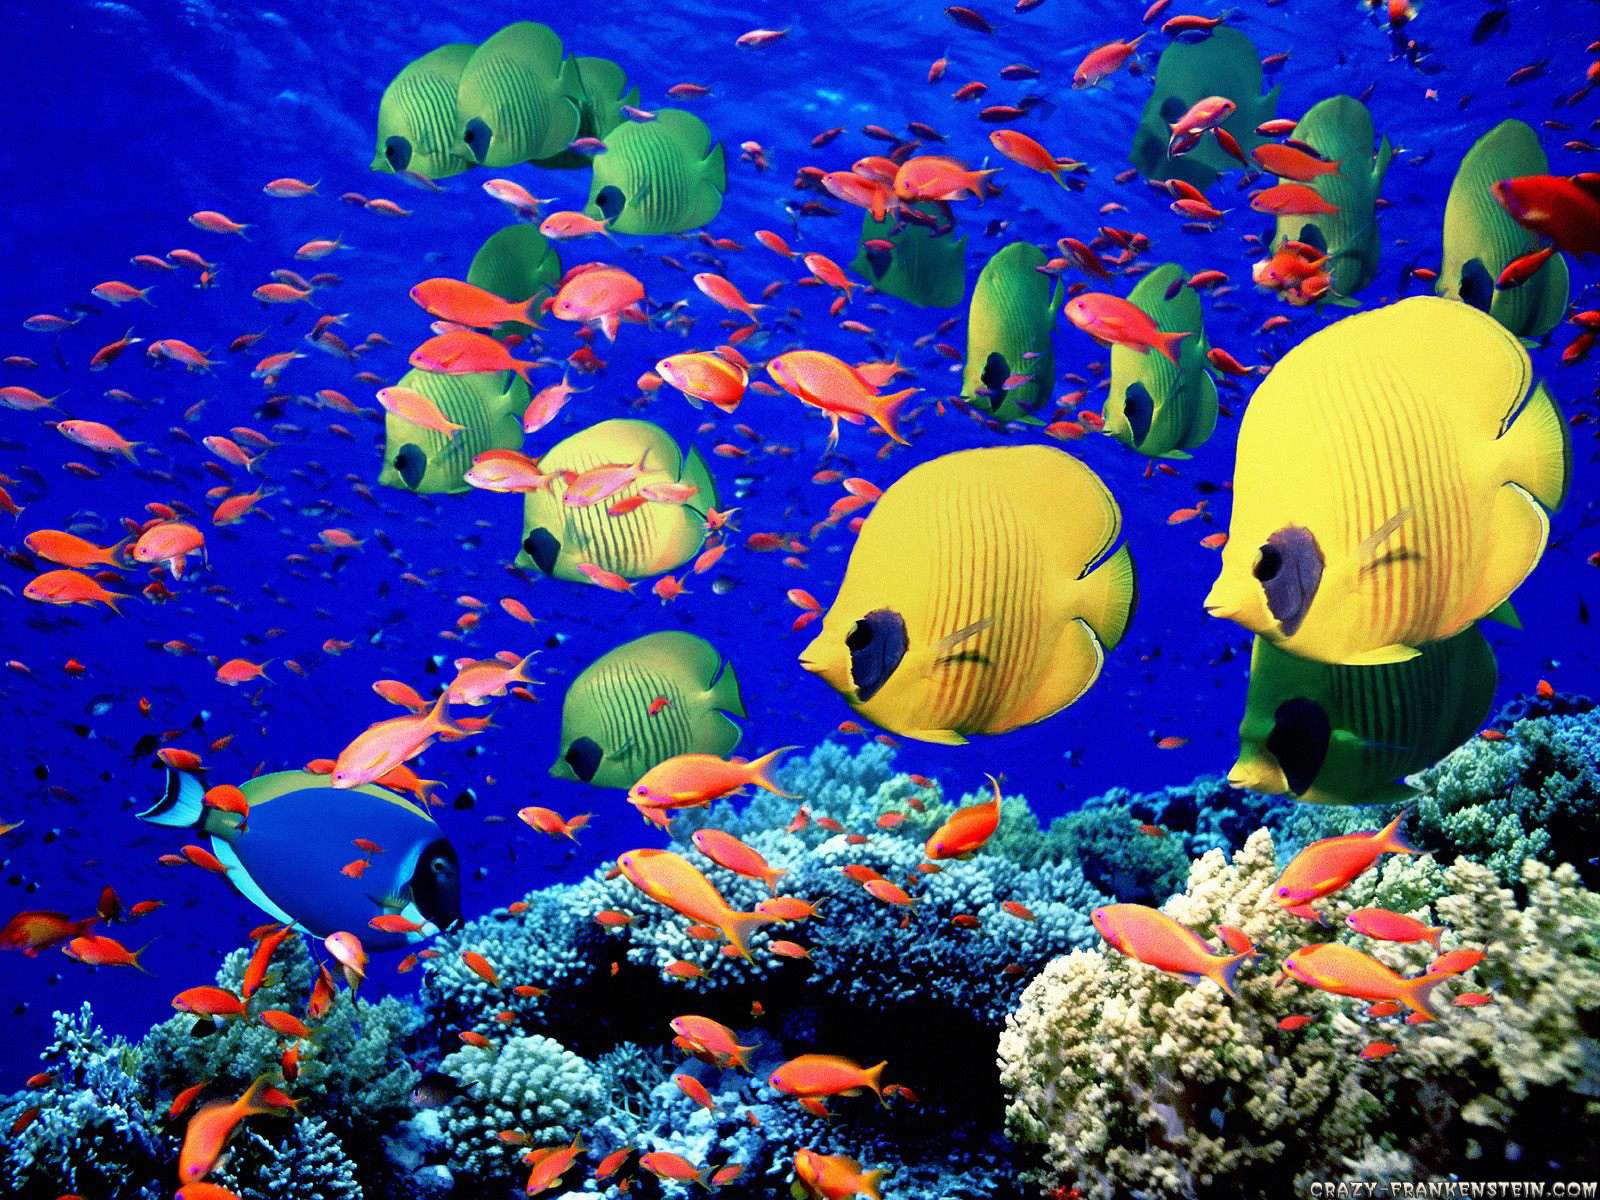 Fish in a Barrtel puzzle online from photo